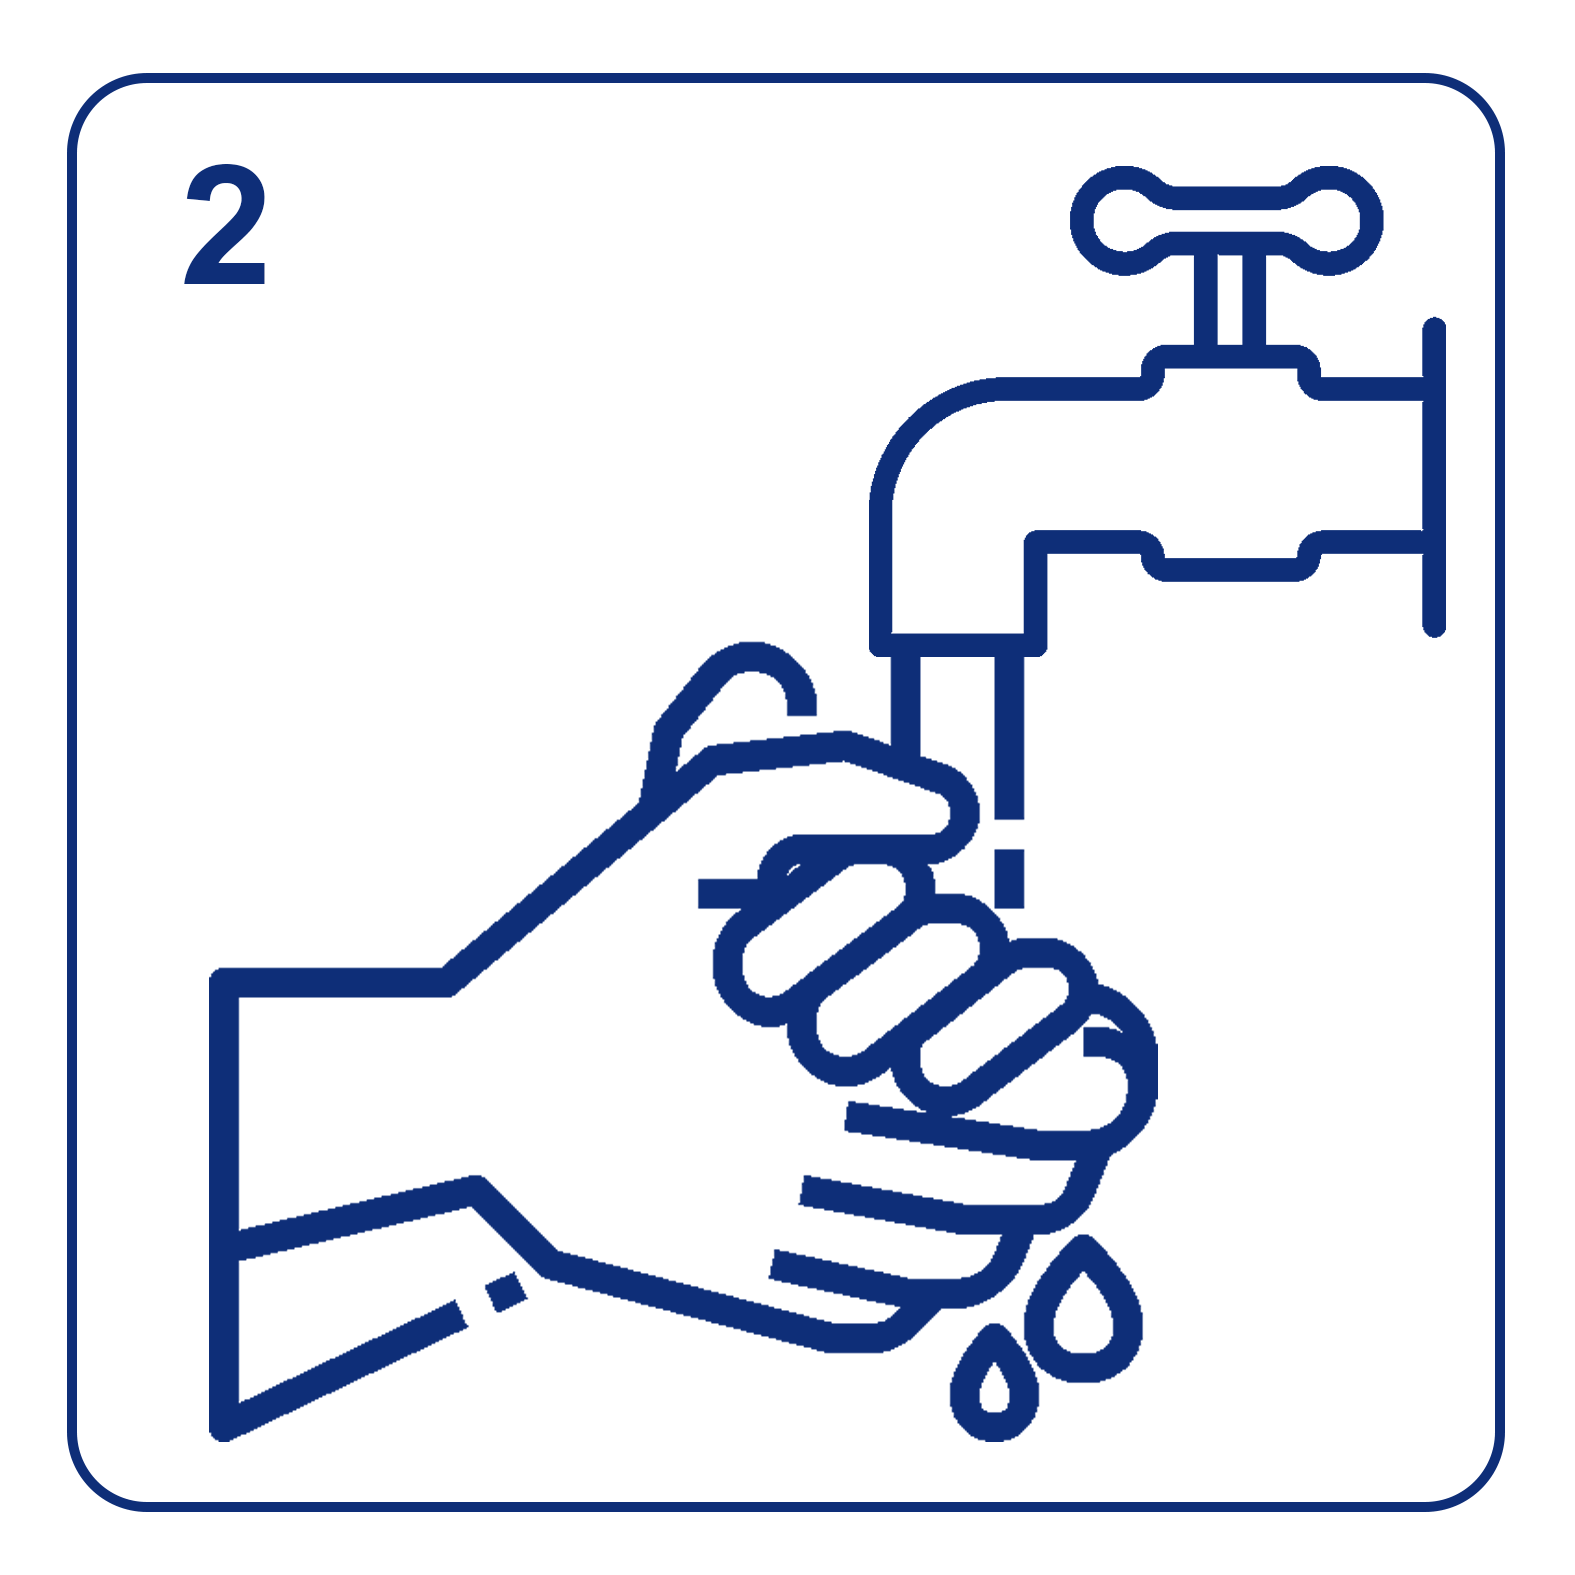 Wash hands thoroughly with soap and water to ensure fingertips are clean and dry.